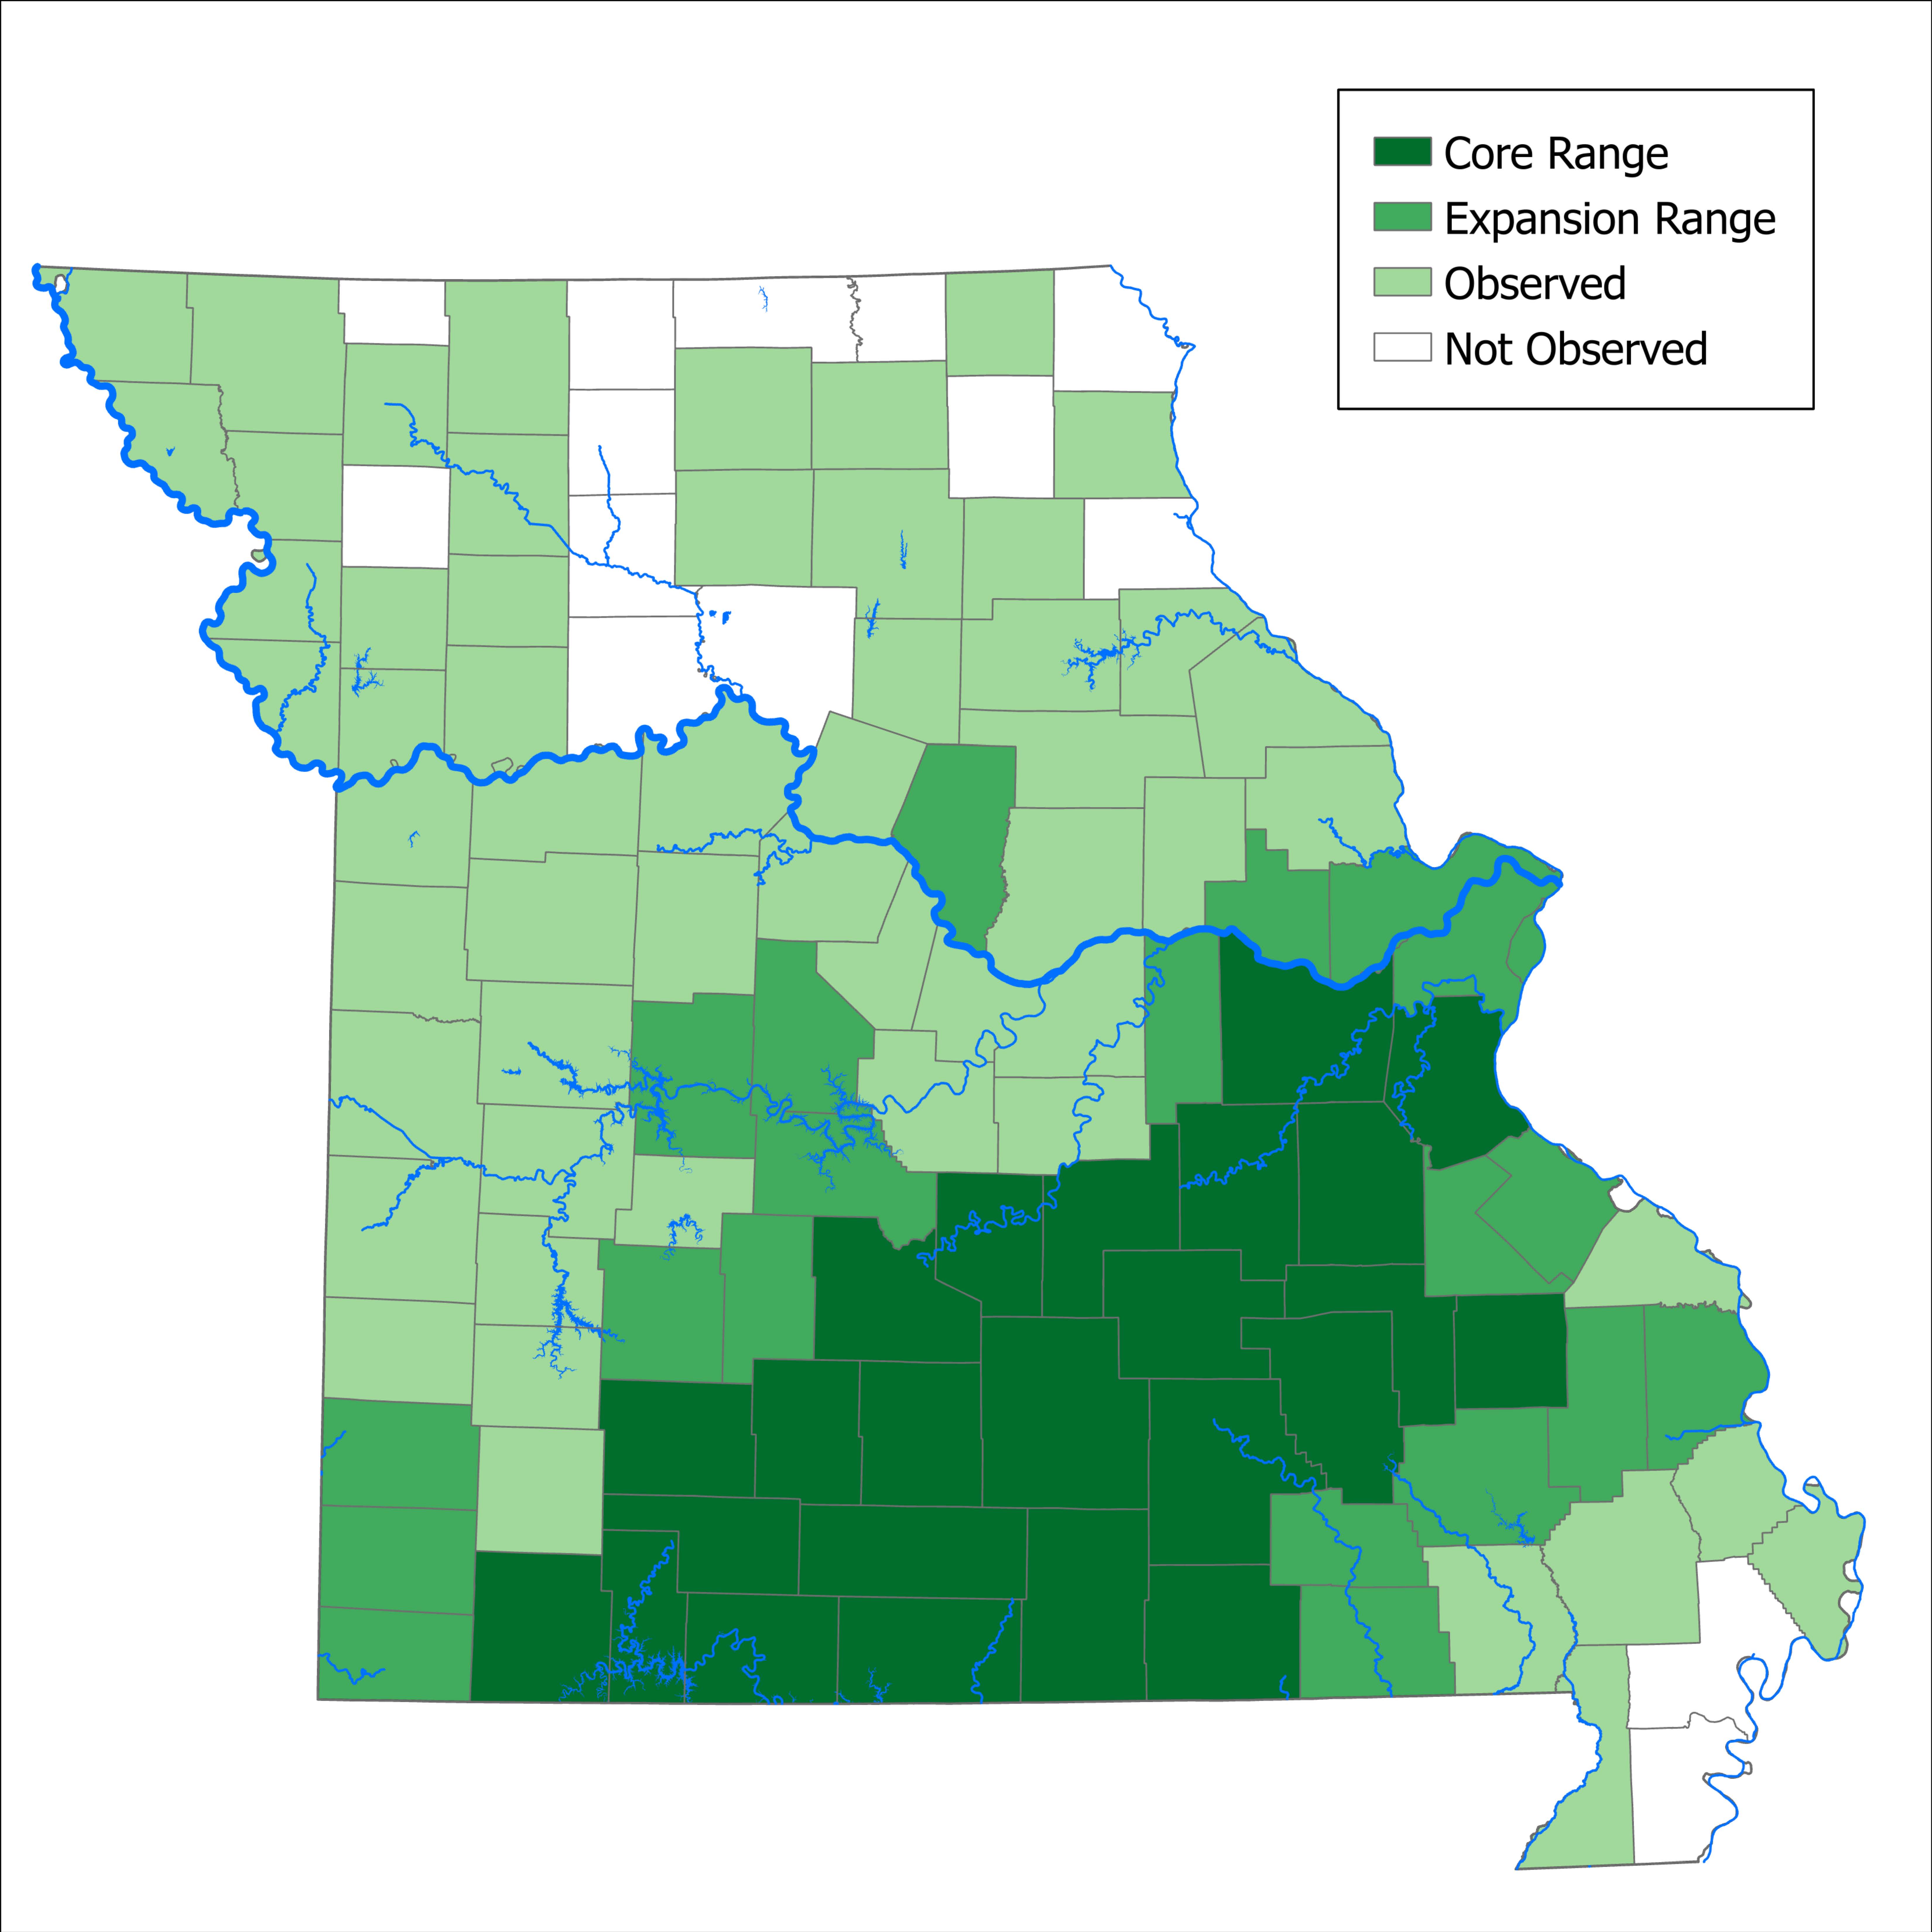 Map of Missouri showing the core range and expansion range of black bears as well as counties where bears have been observed. 